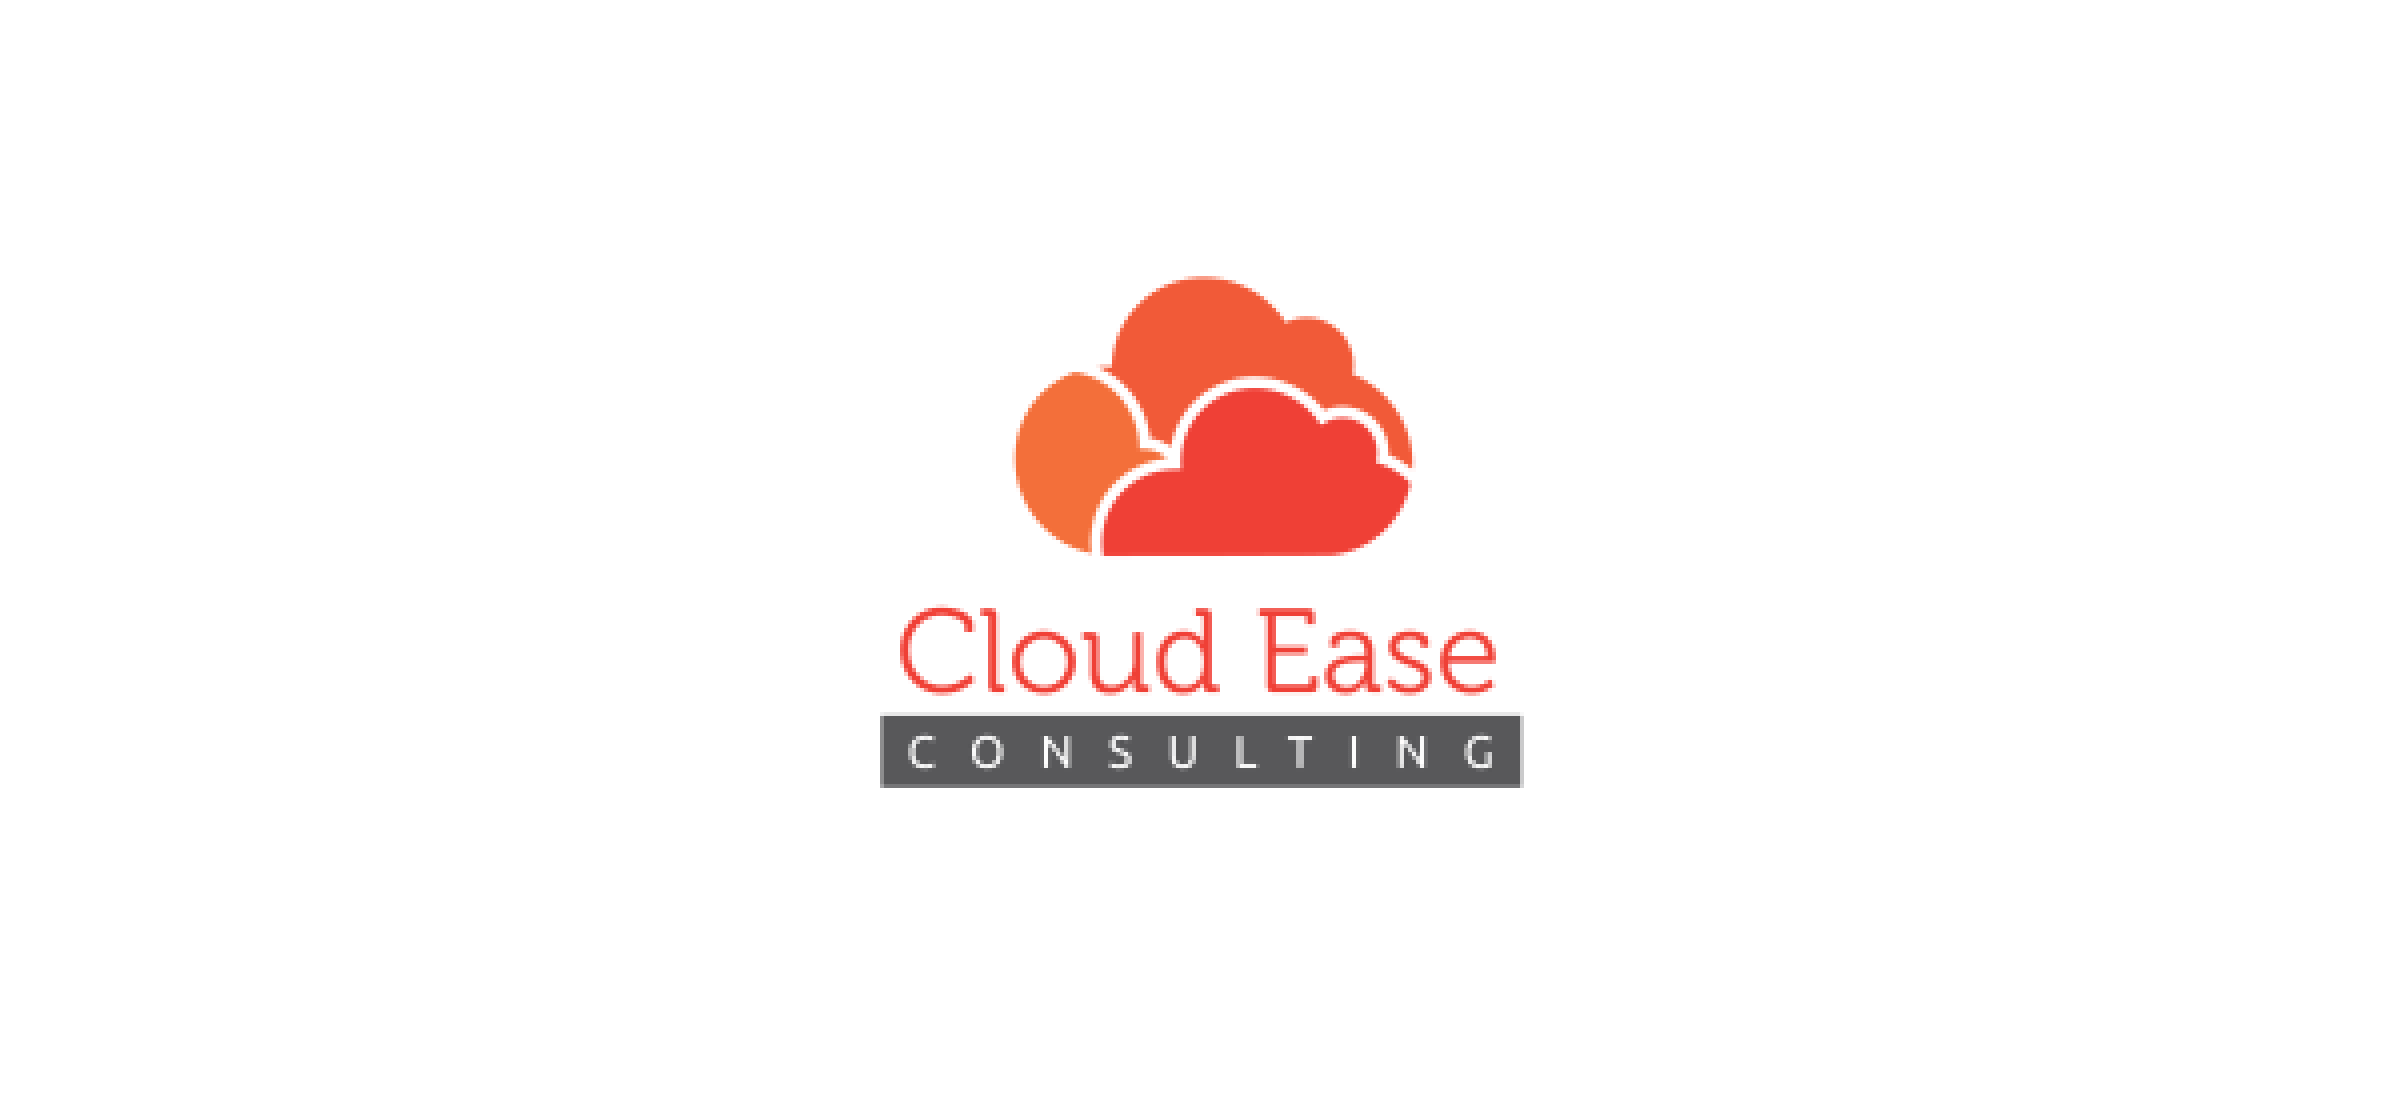 The Cloudease Consulting logo